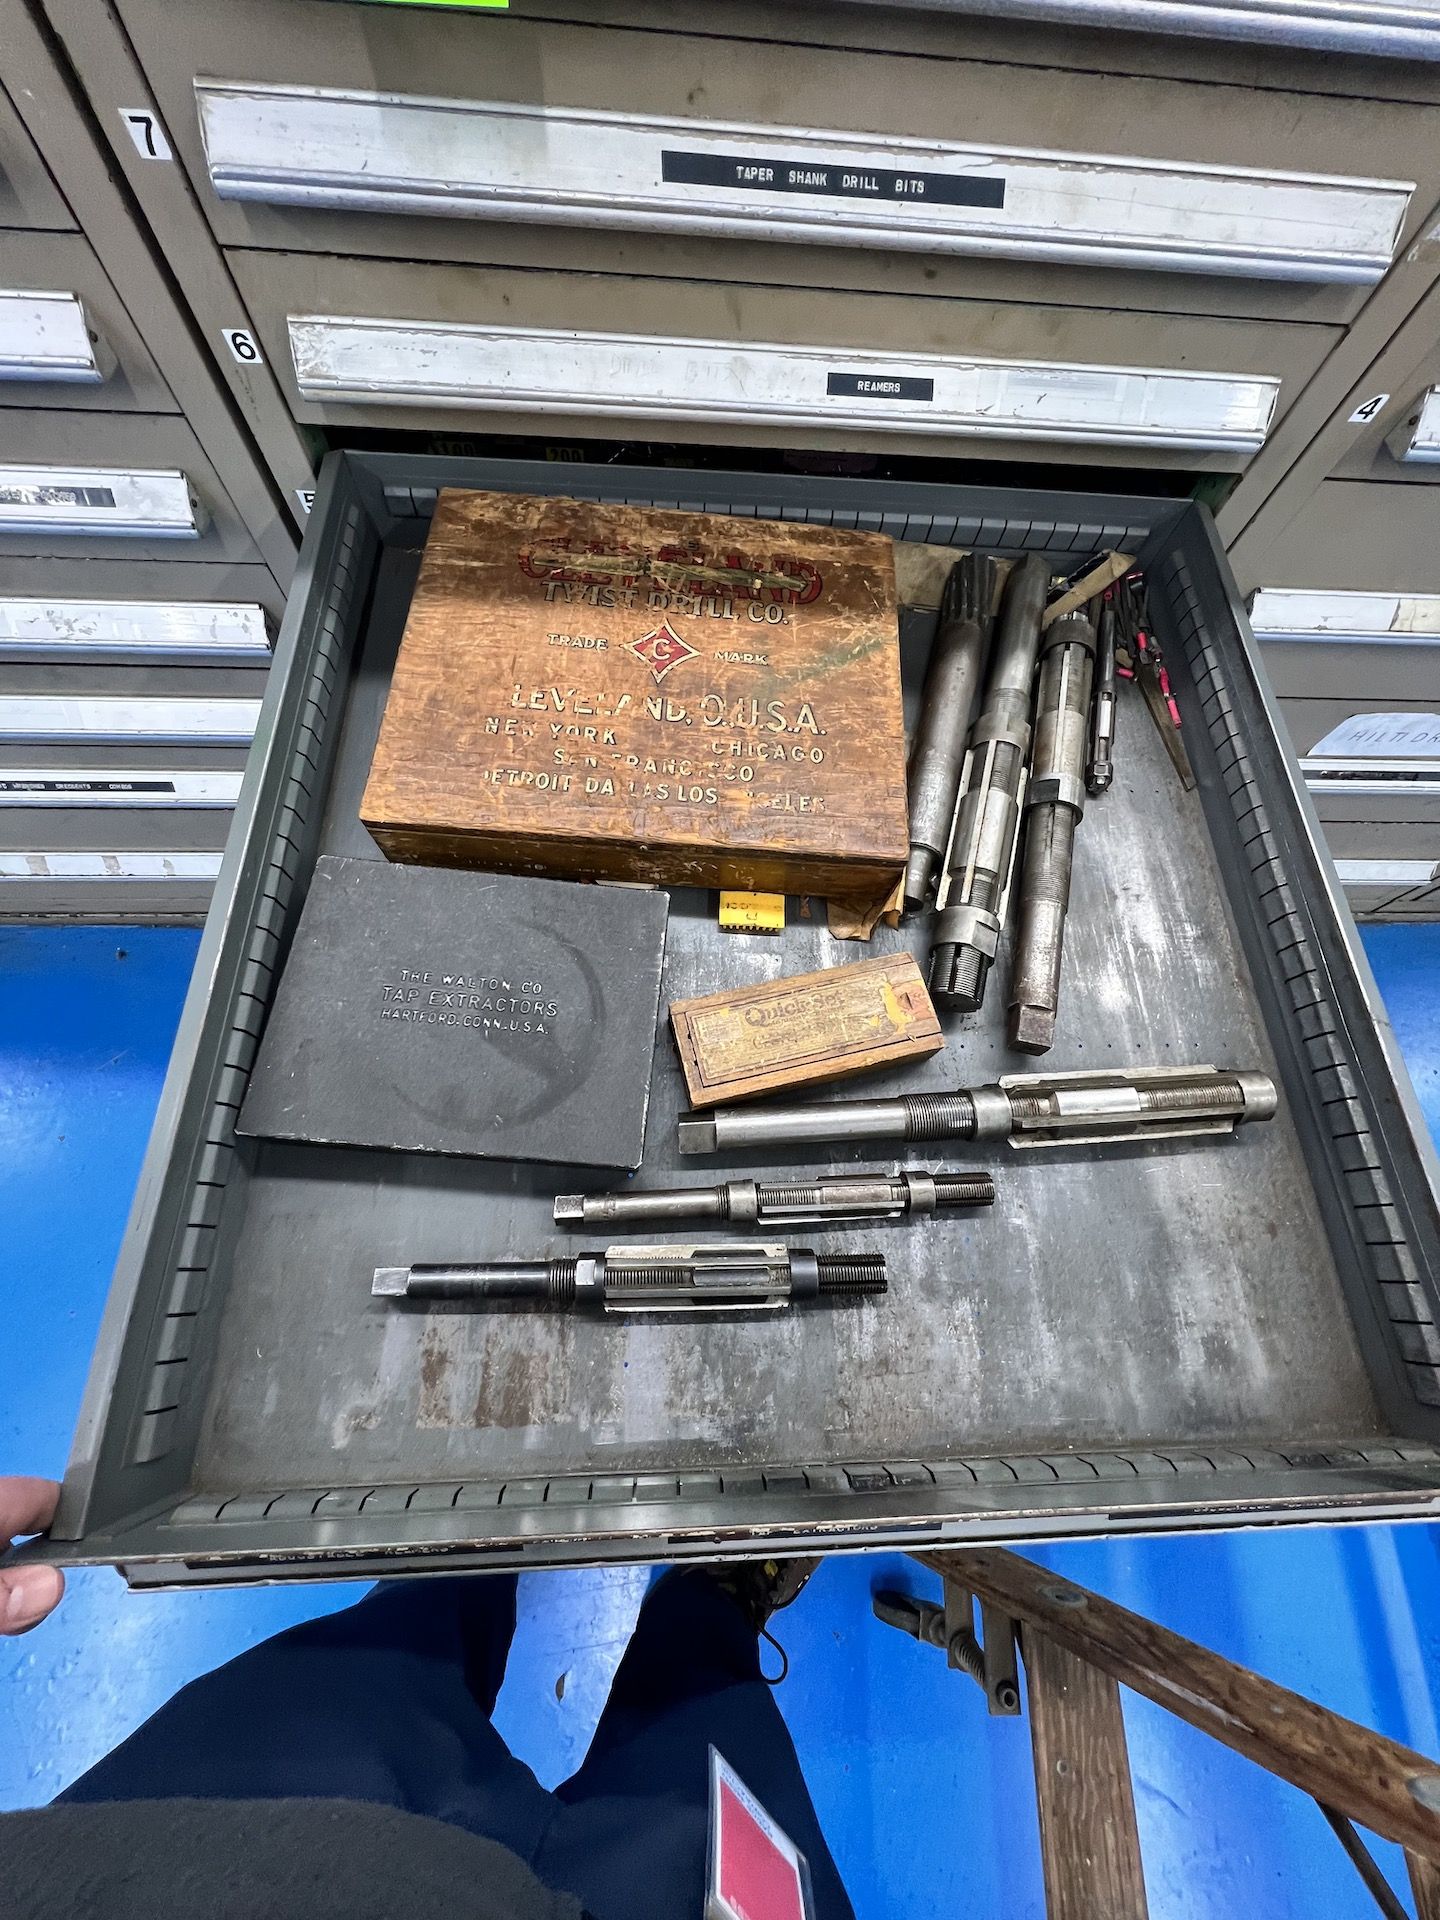 PARTS CABINET WTH CONTENTS, INCLUDES ASSORTED HARDWARE, INCLUDES ASSORTED WRENCHES, POP RIVETS, - Image 11 of 17